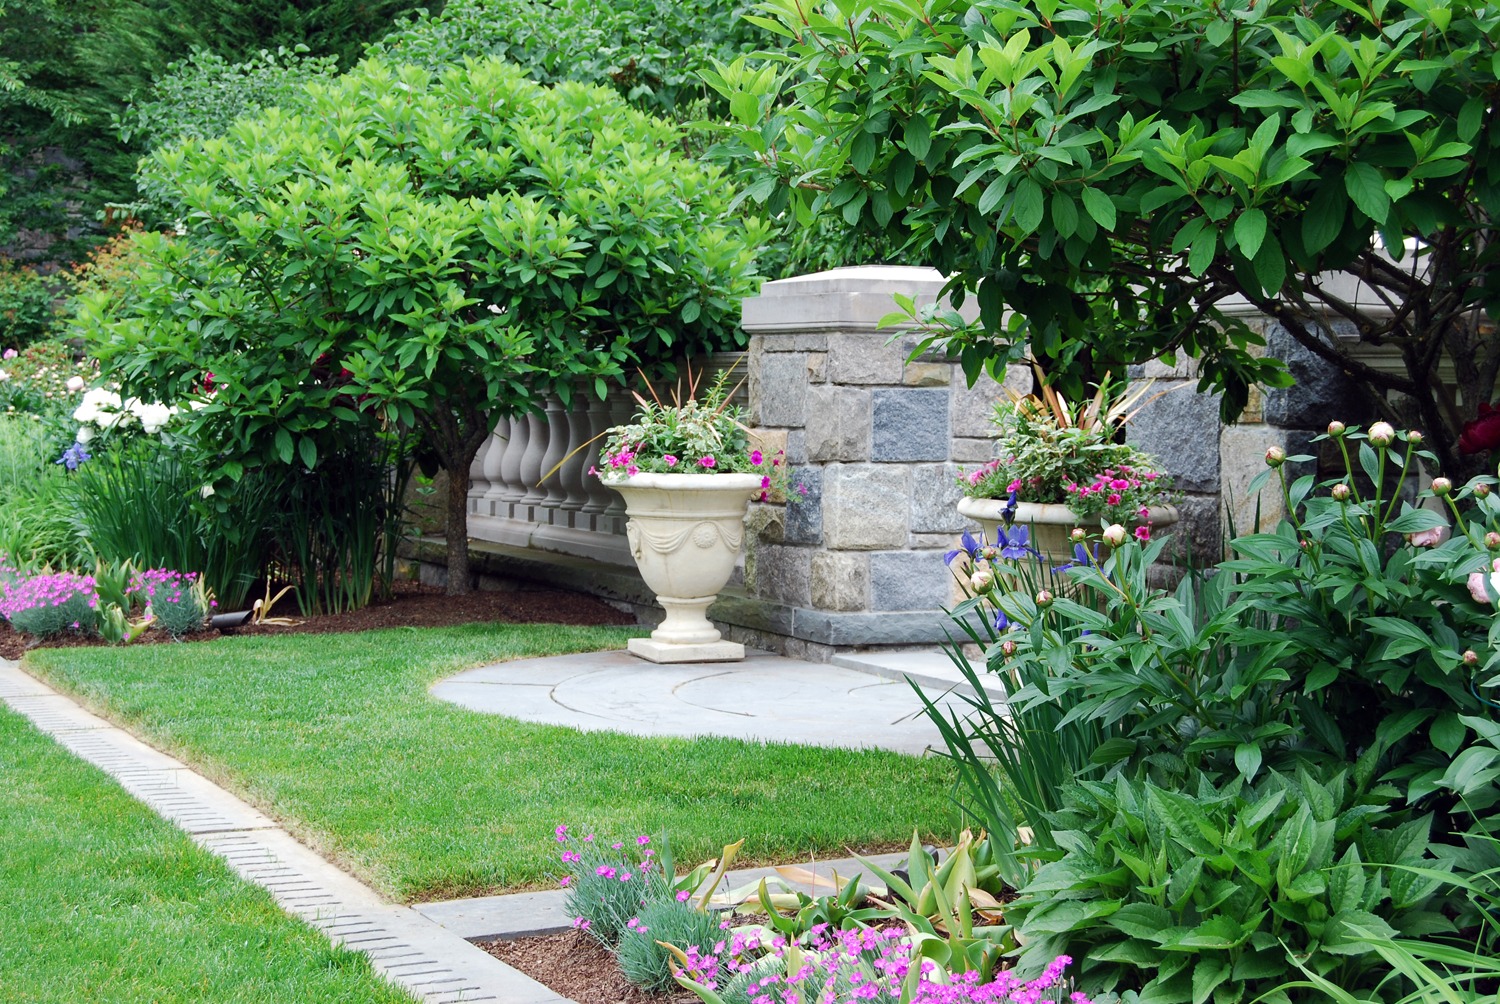 A well-manicured garden with lush greenery, flowering plants, a classic urn planter, stone pathways, and an elegant stone bench.